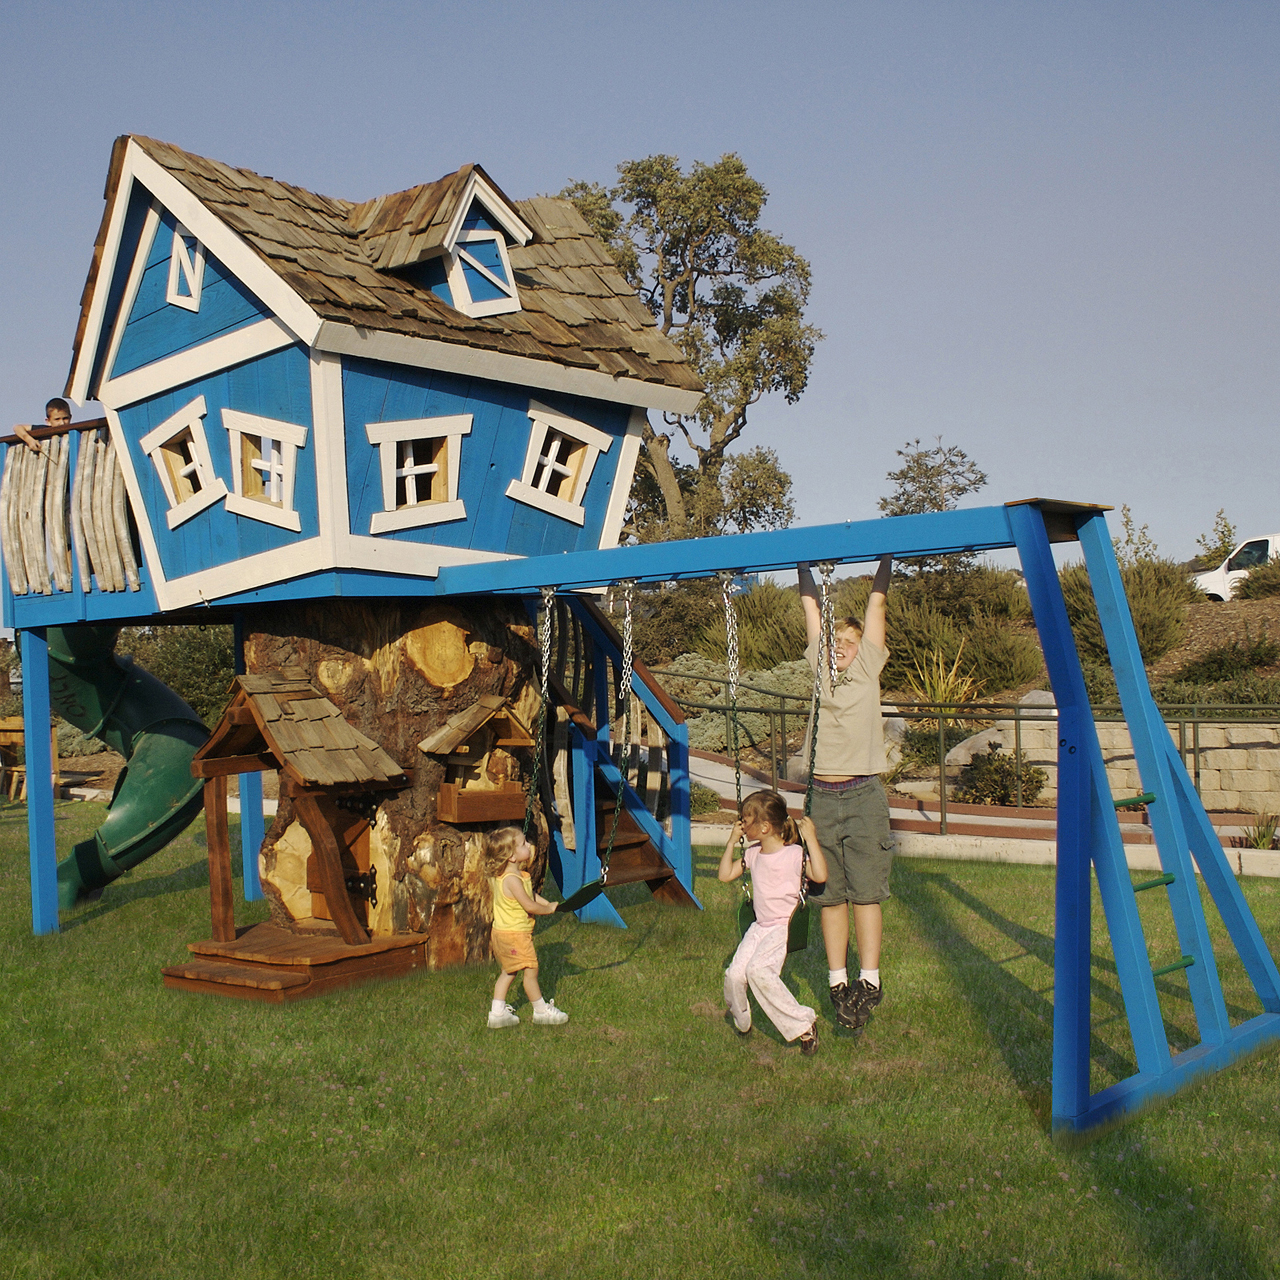 Playhouses for Kids 21st Century Style! | thelittlelegscompany